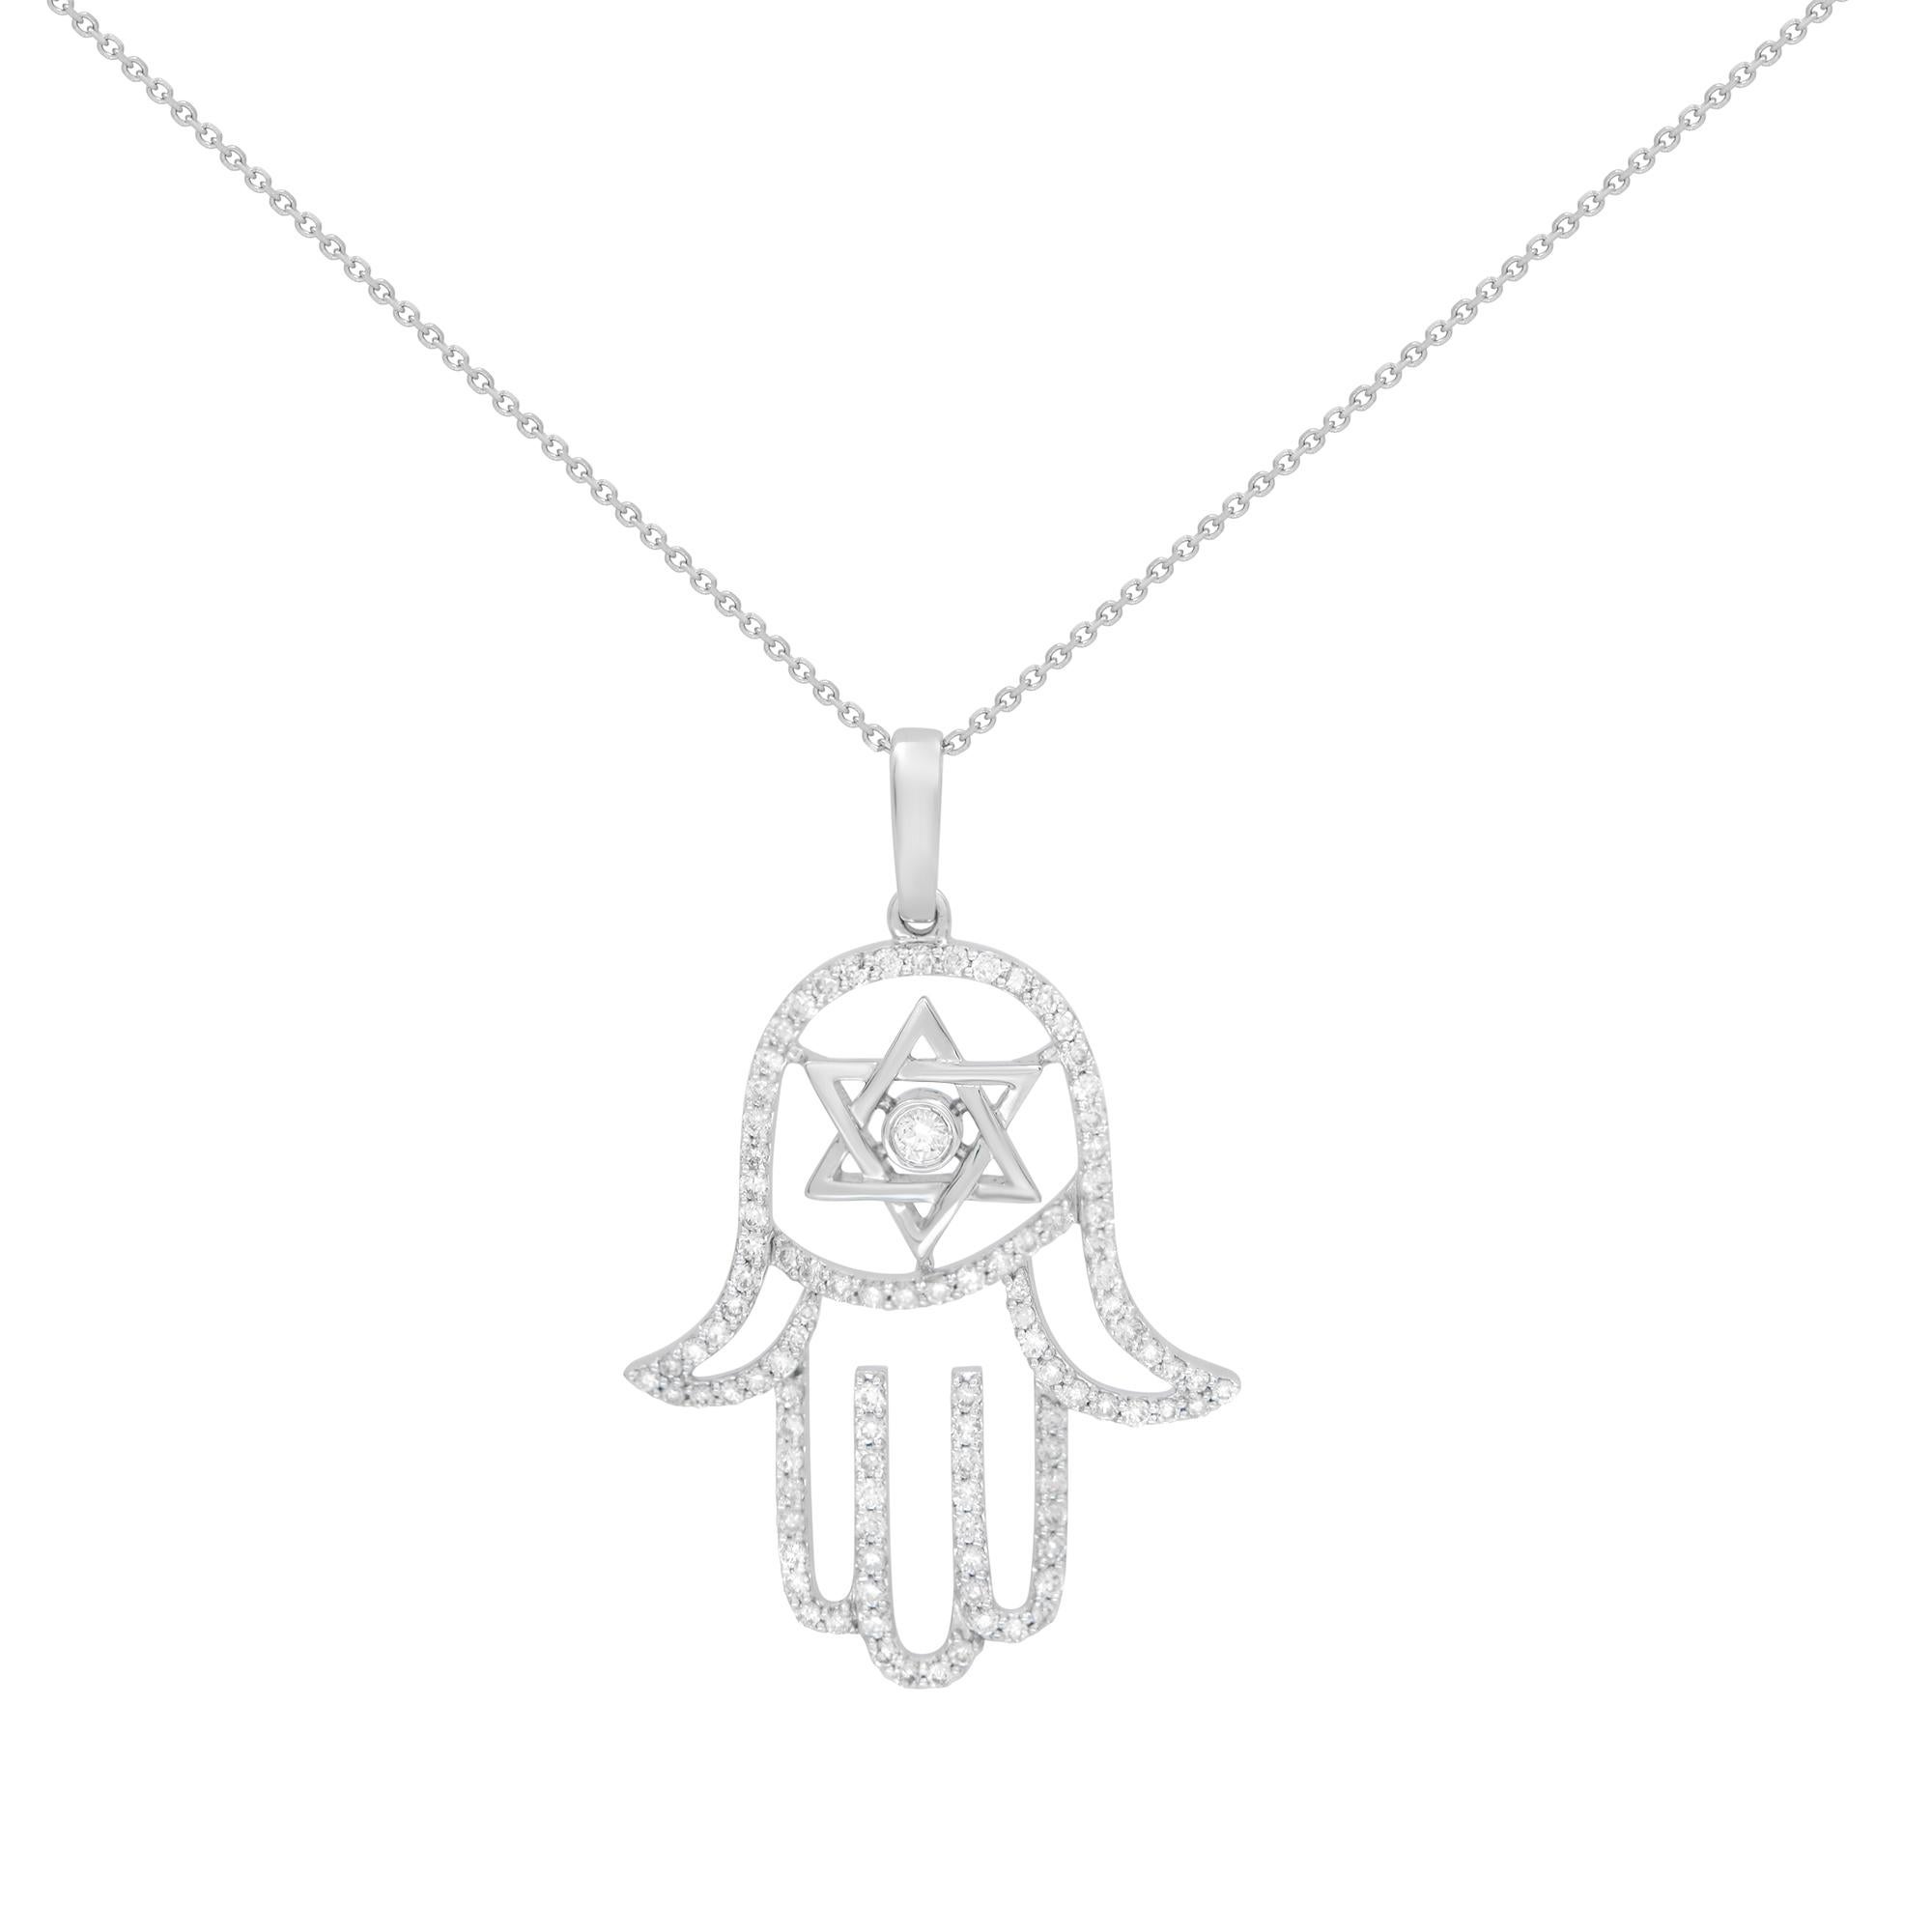 The Star of David sign and the Hamsa symbols are unified in this majestic pendant that features 0.65 brilliant round white diamonds in micro pave setting. Crafted in 14k white gold. Diamond color G-H and VS-SI clarity. Pendant size: 27x23mm. Chain